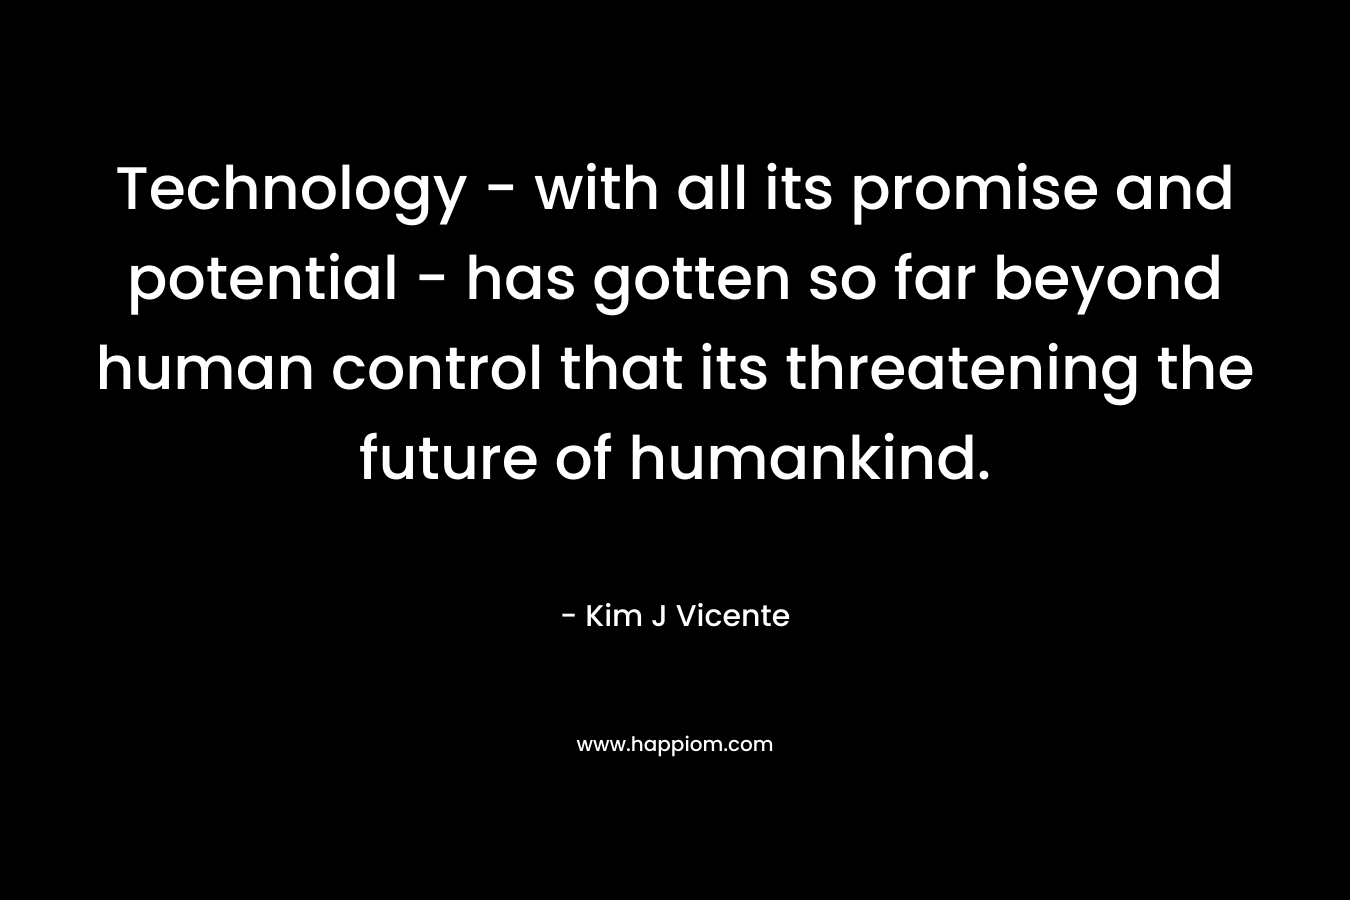 Technology - with all its promise and potential - has gotten so far beyond human control that its threatening the future of humankind.